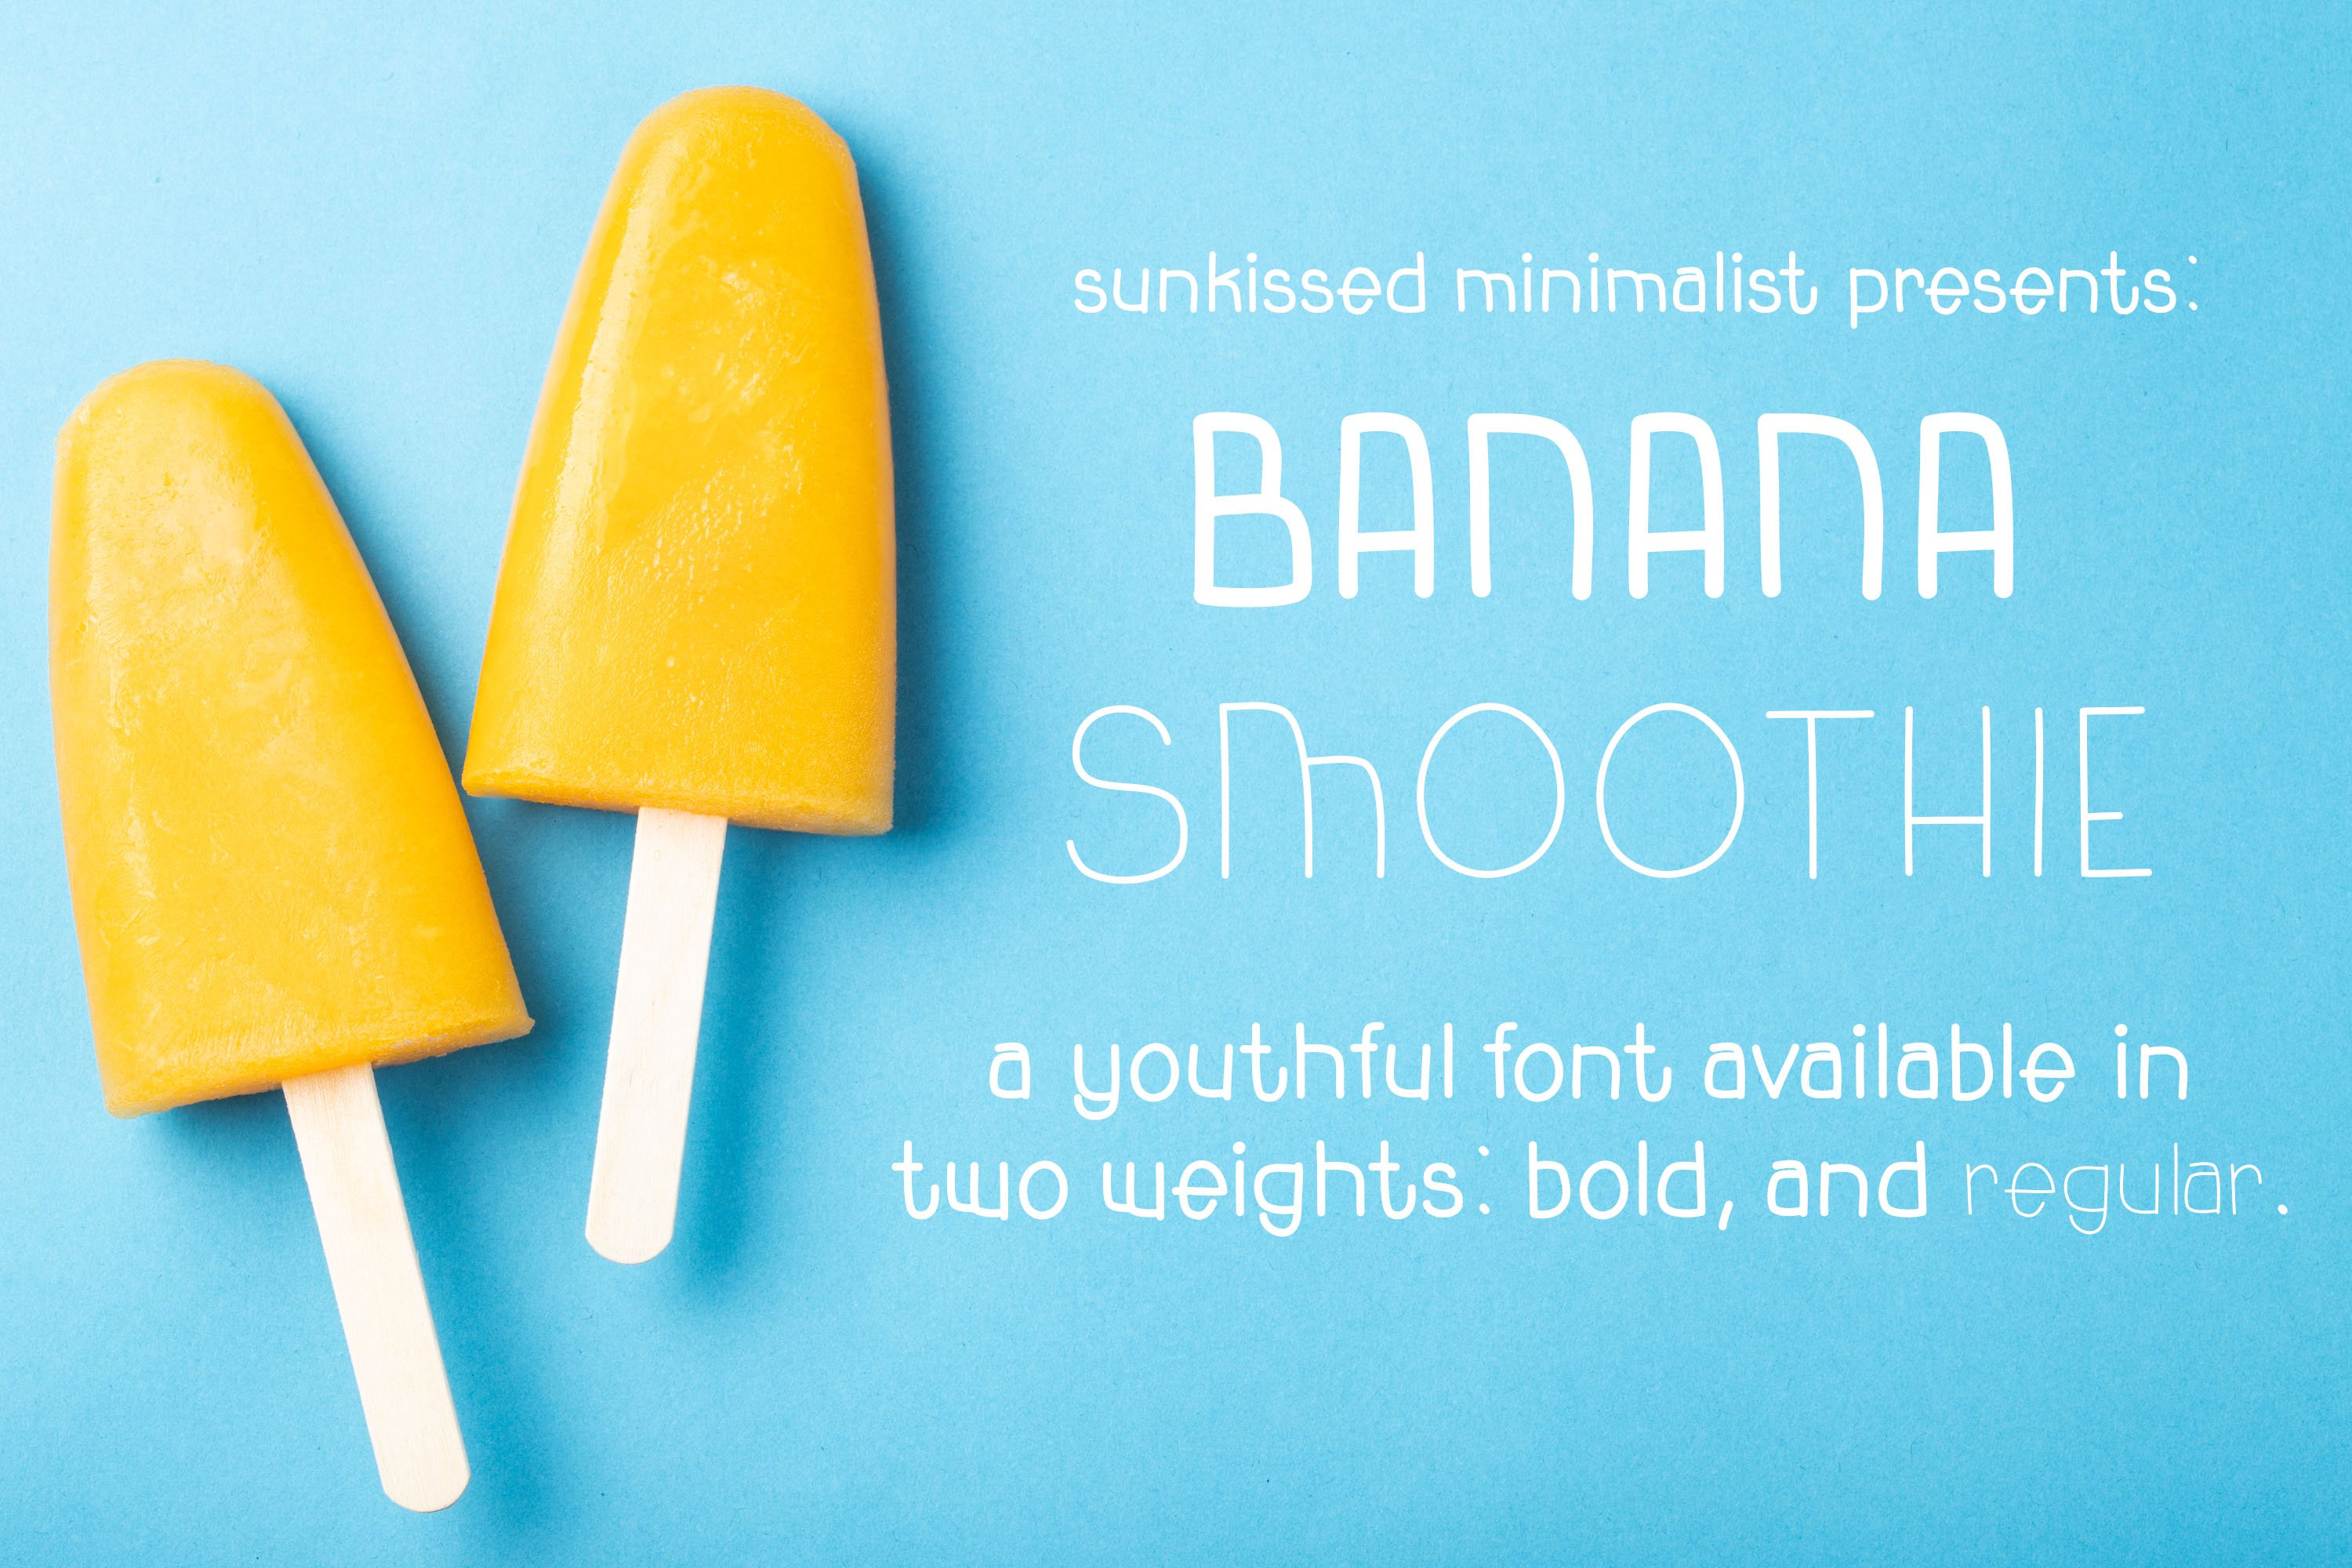 Banana Smoothie cover image.